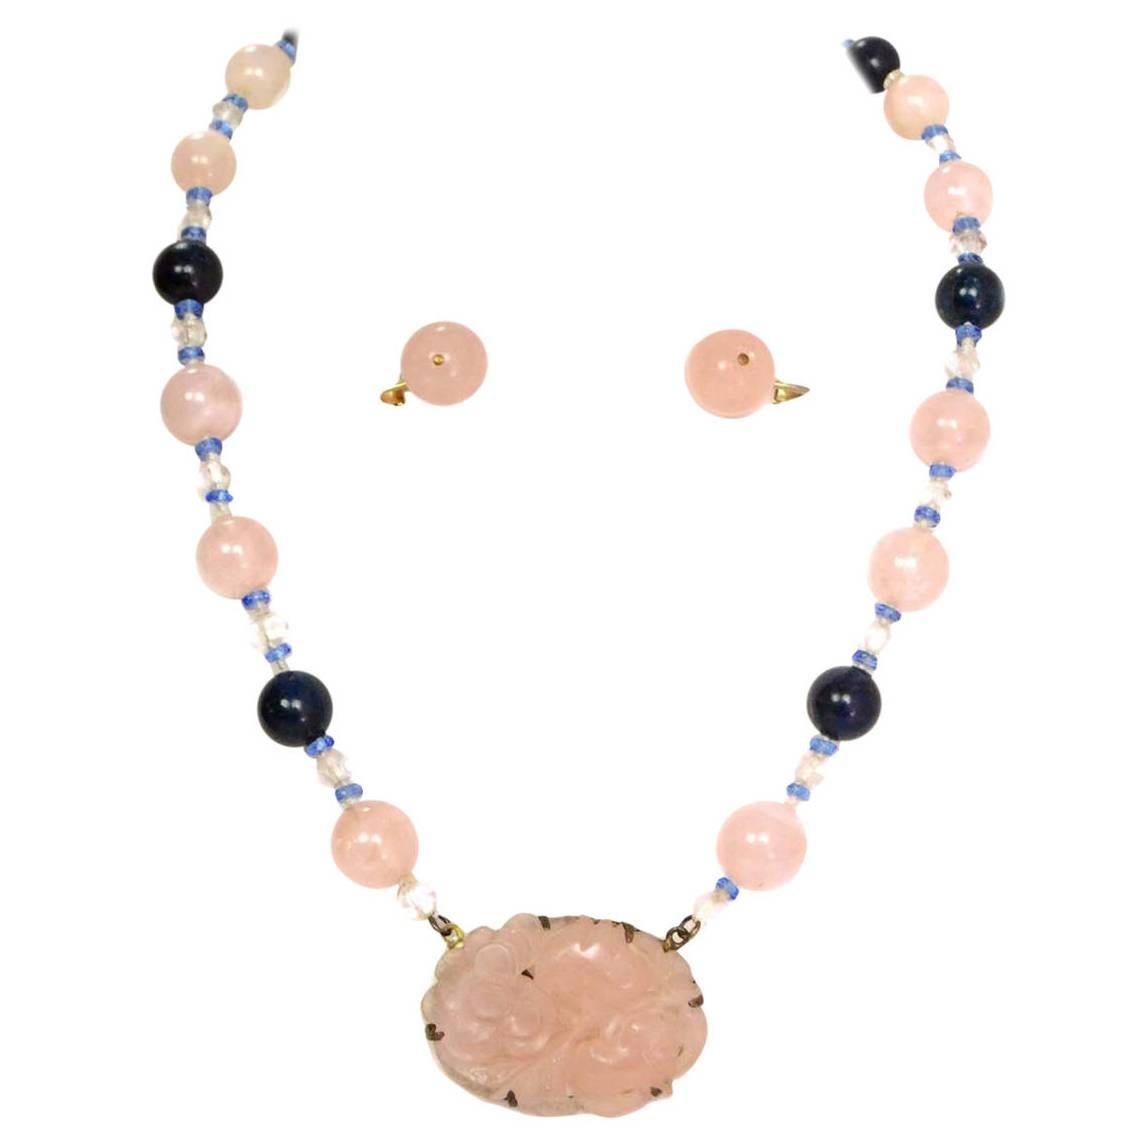 Pale Pink & Navy Glass Bead Necklace & Earrings Set
Necklace features pale pink floral stone pendant
Closure: Necklace- Antique push and lock clasp, Earrings- clip on
Color: Pale pink, navy, light blue and silvertone
Materials: Glass,